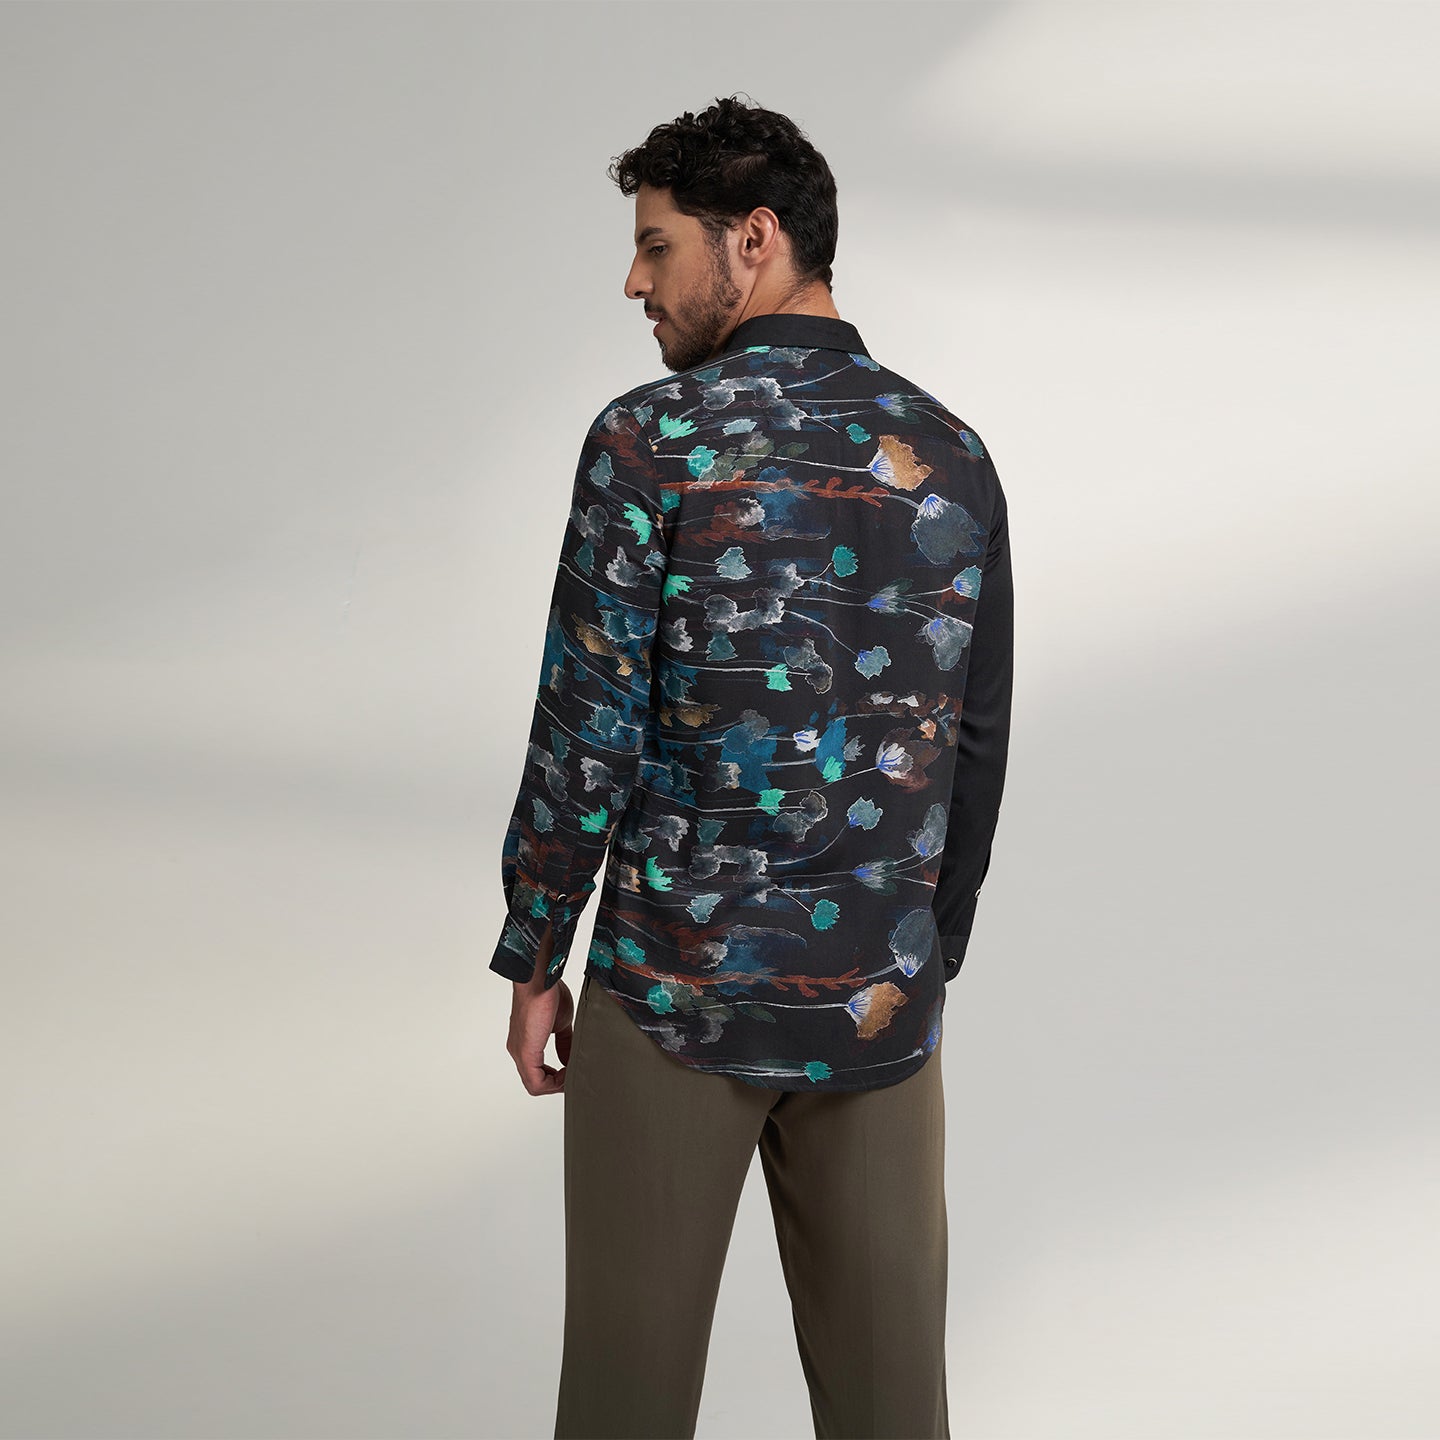 The printed Black floral organic lotus fabric shirt offers an interpretation of a timeless piece with a modern take. Made from a soft lotus stem silk fabric, It displays a comfortable fit and a rounded curved hemline featuring a placement floral pattern with one sleeve in solid and other sleeves in print, inspired by the  wilderness